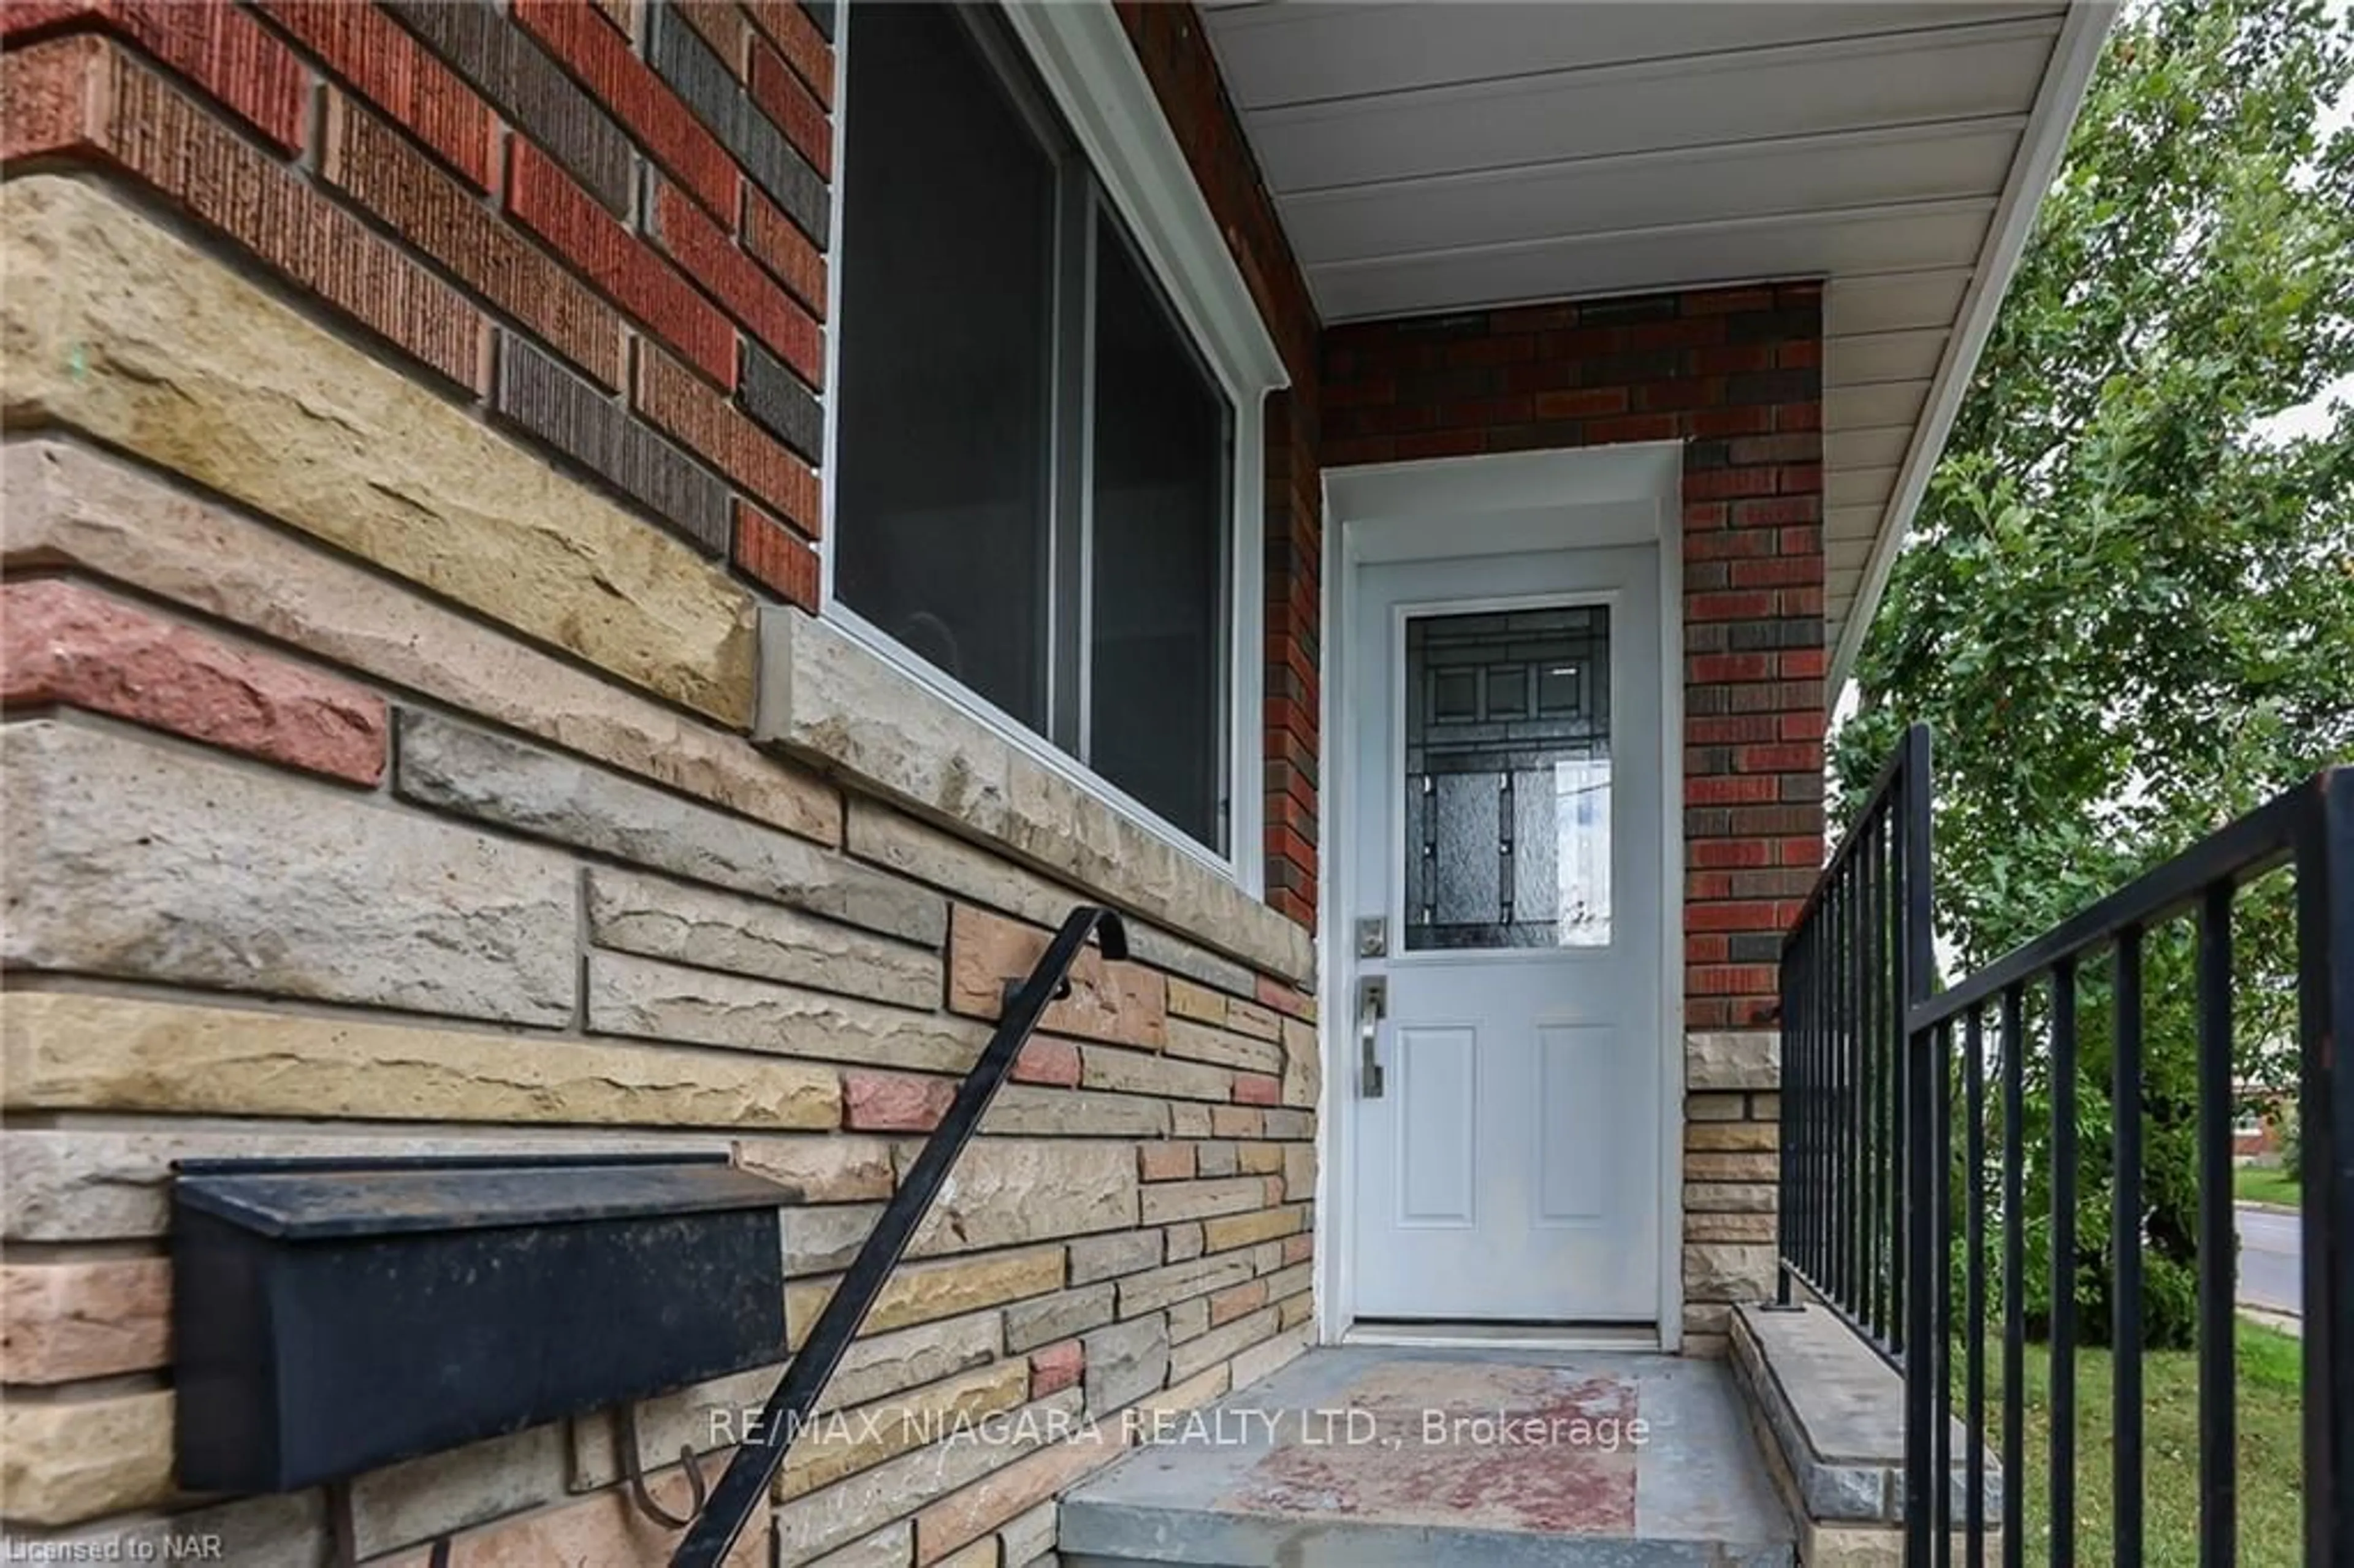 Home with brick exterior material for 261 Vine St, St. Catharines Ontario L2M 4T2